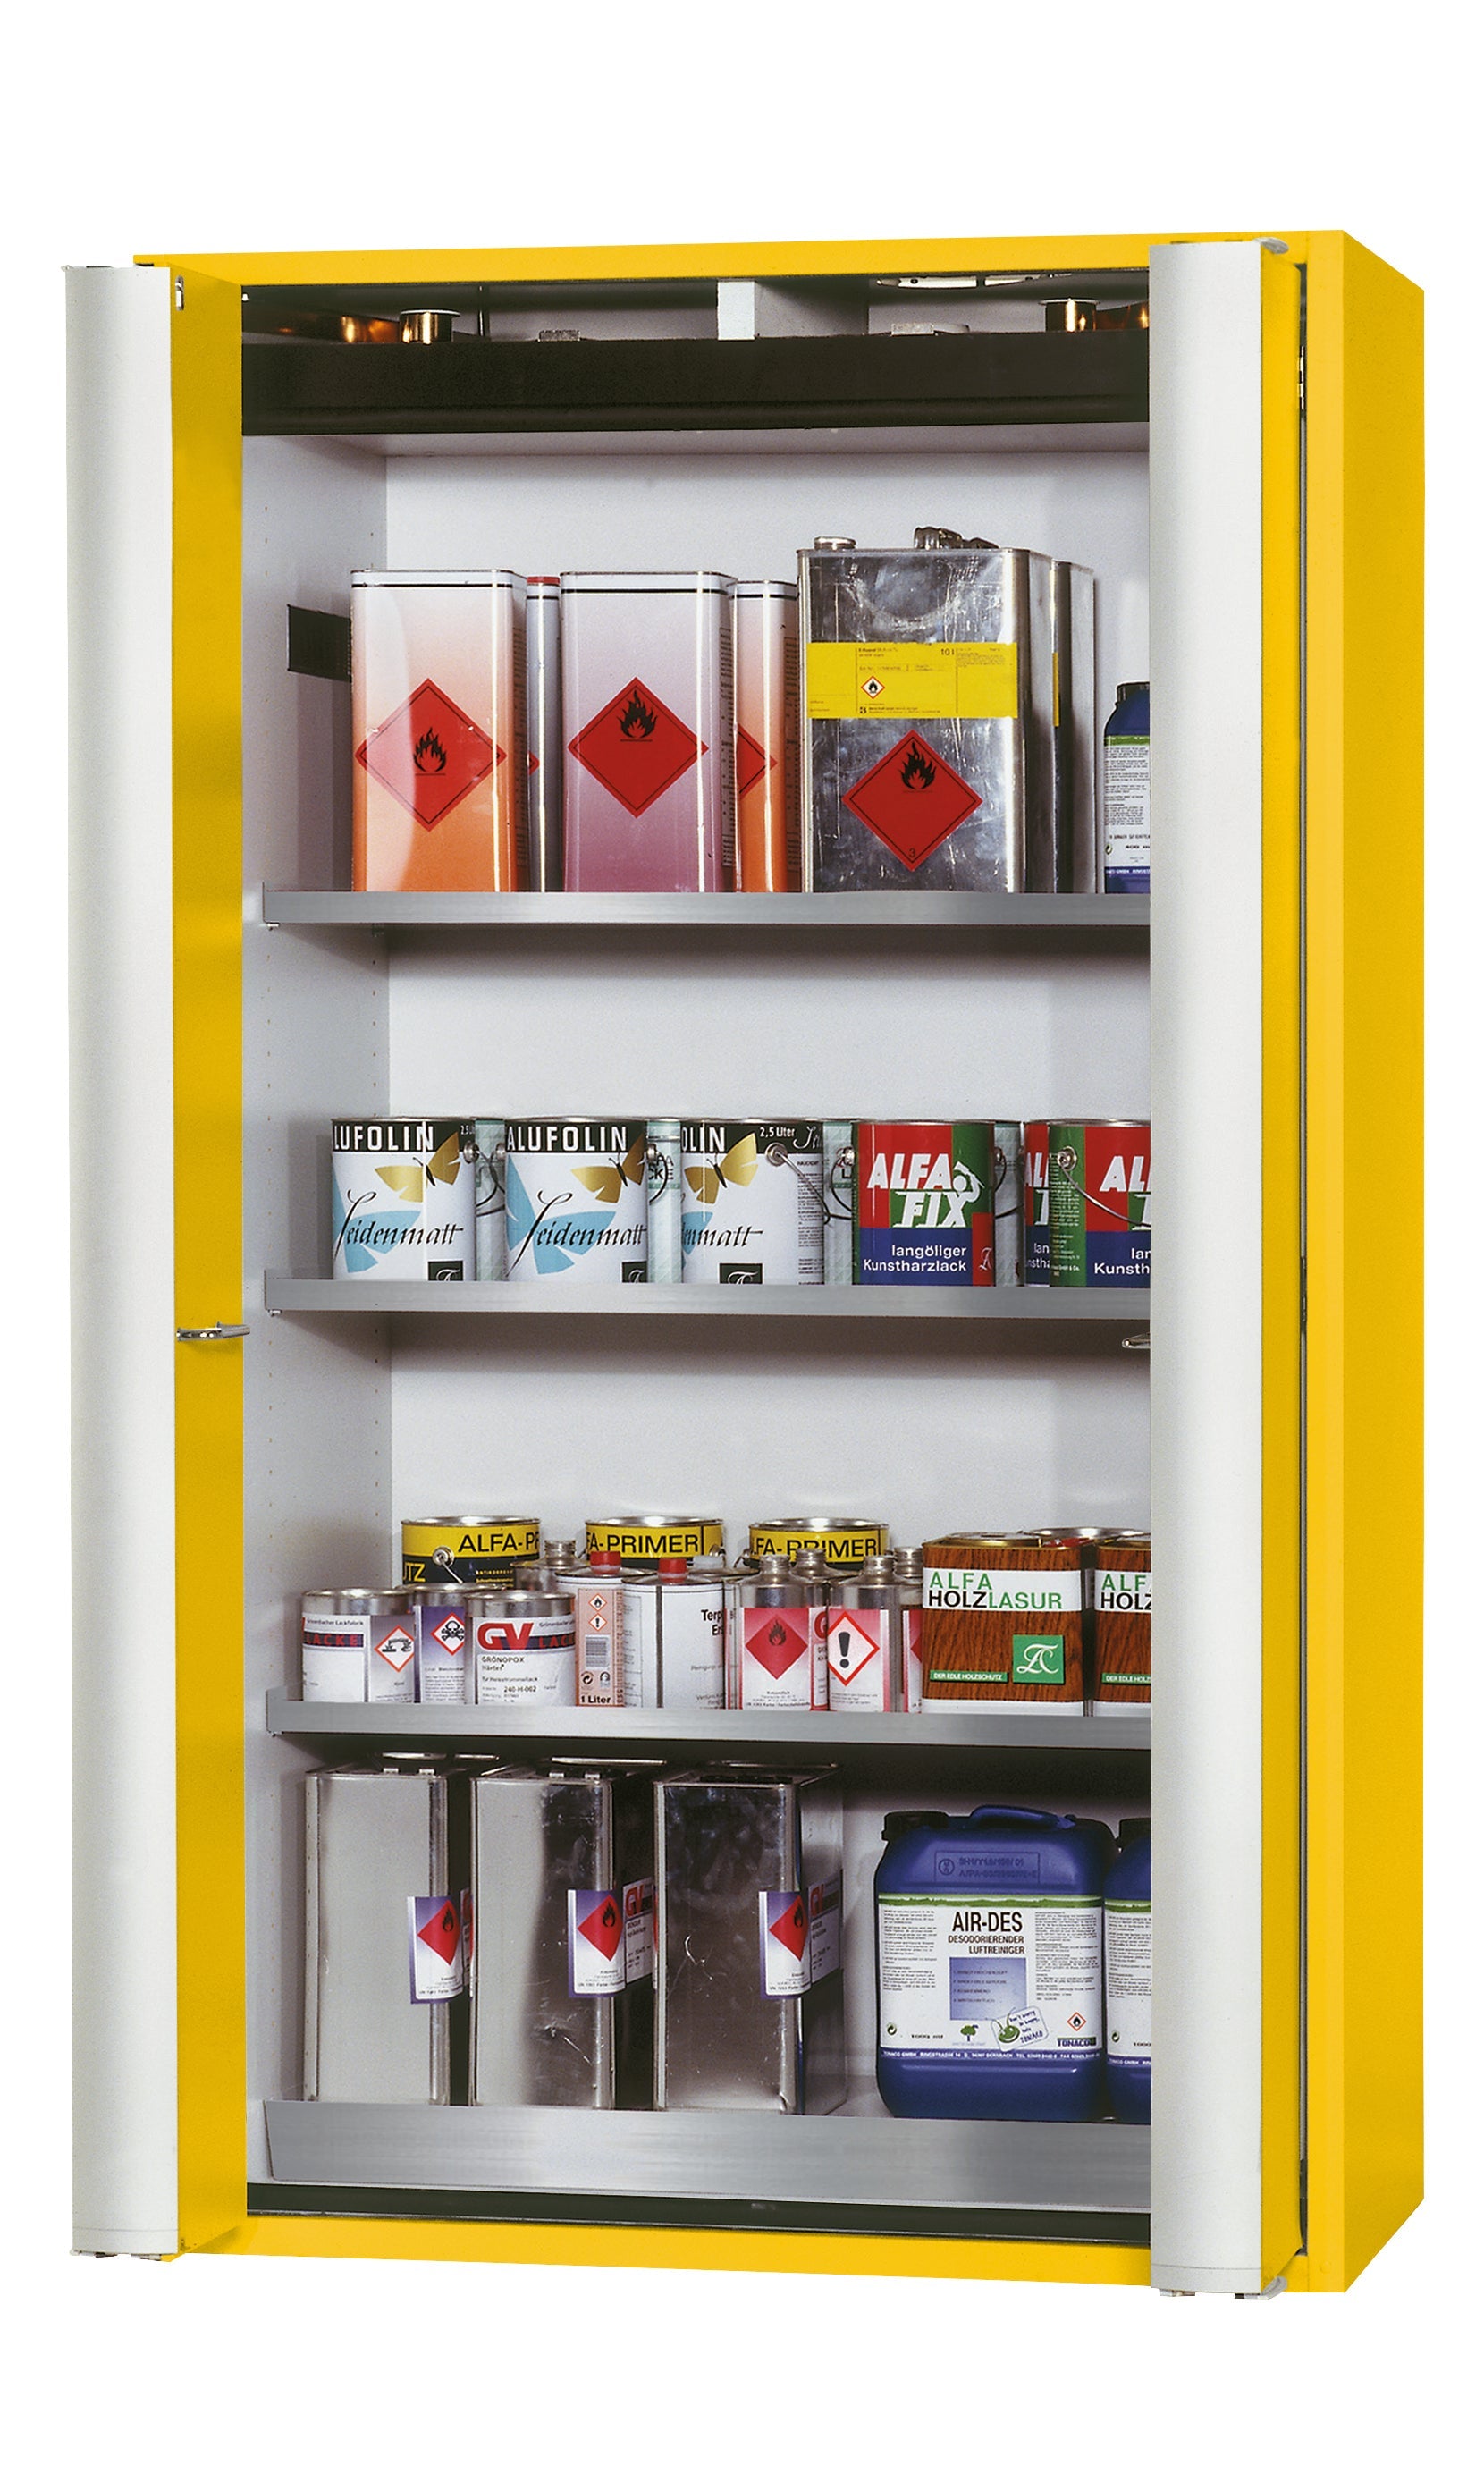 Type 90 safety storage cabinet S-PHOENIX-90 model S90.196.120.FDAS in warning yellow RAL 1004 with 3x shelf standard (stainless steel 1.4301),